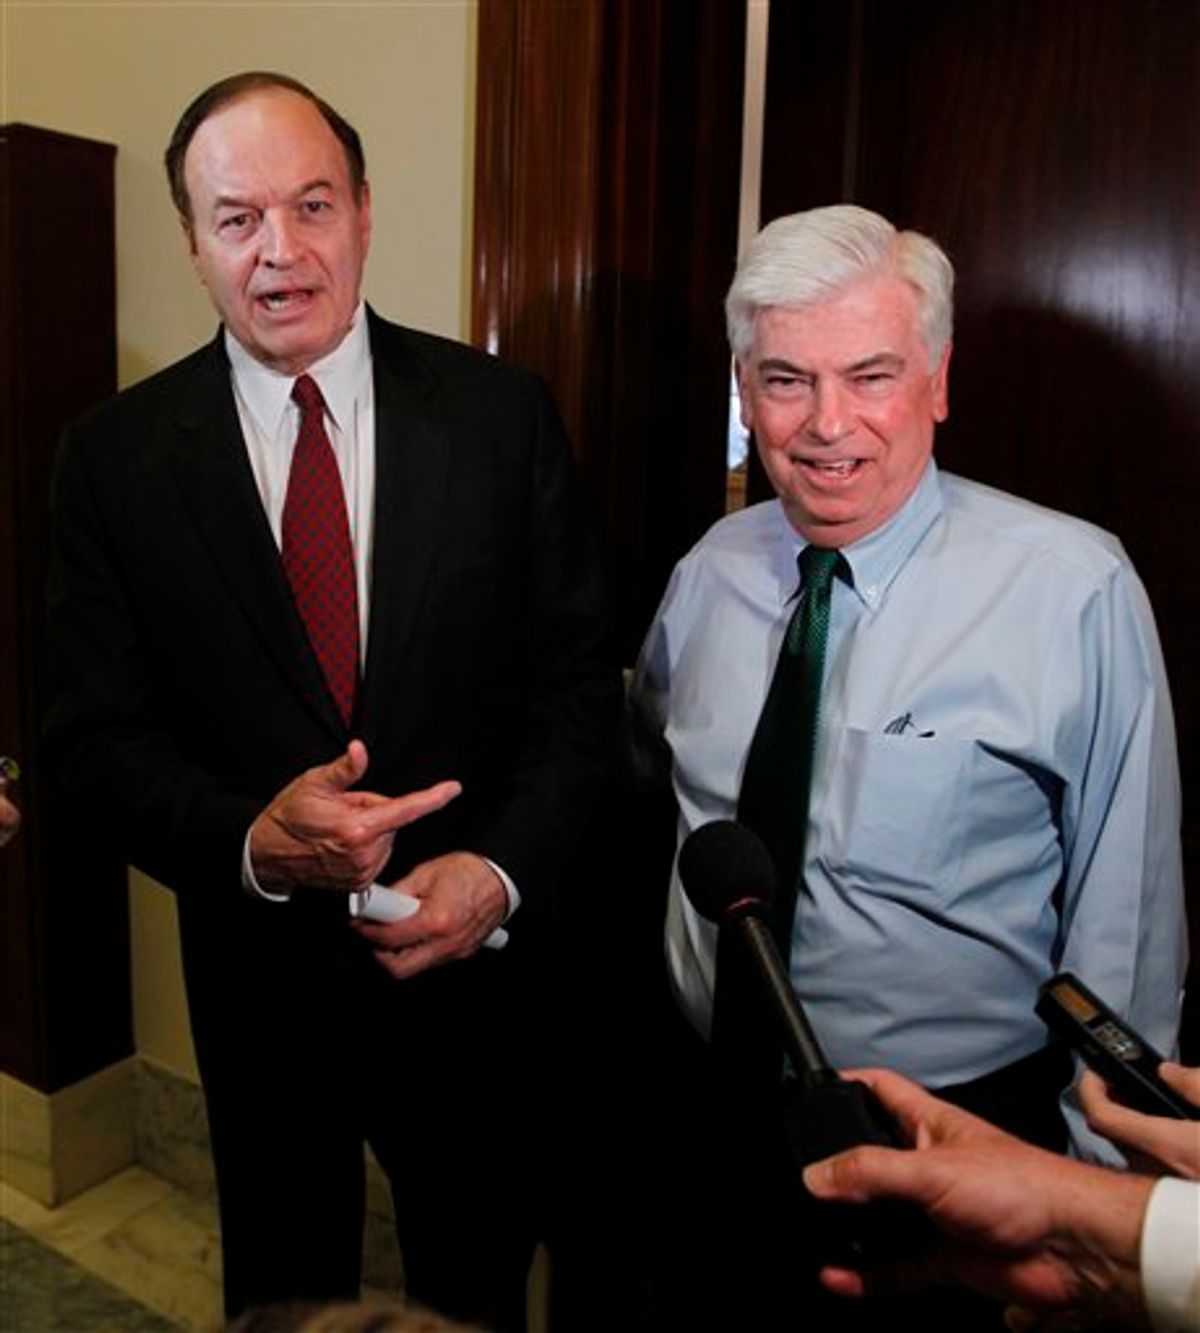 Senate Banking Committee Chairman Christopher Dodd, D-Conn., right, and the committee's ranking Republican Sen. Richard Shelby, R-Ala., emerge from a meeting on Capitol Hill in Washington, Monday, April 26, 2010, ahead of a crucial test vote for the financial reform bill. (AP Photo/Charles Dharapak) (AP)